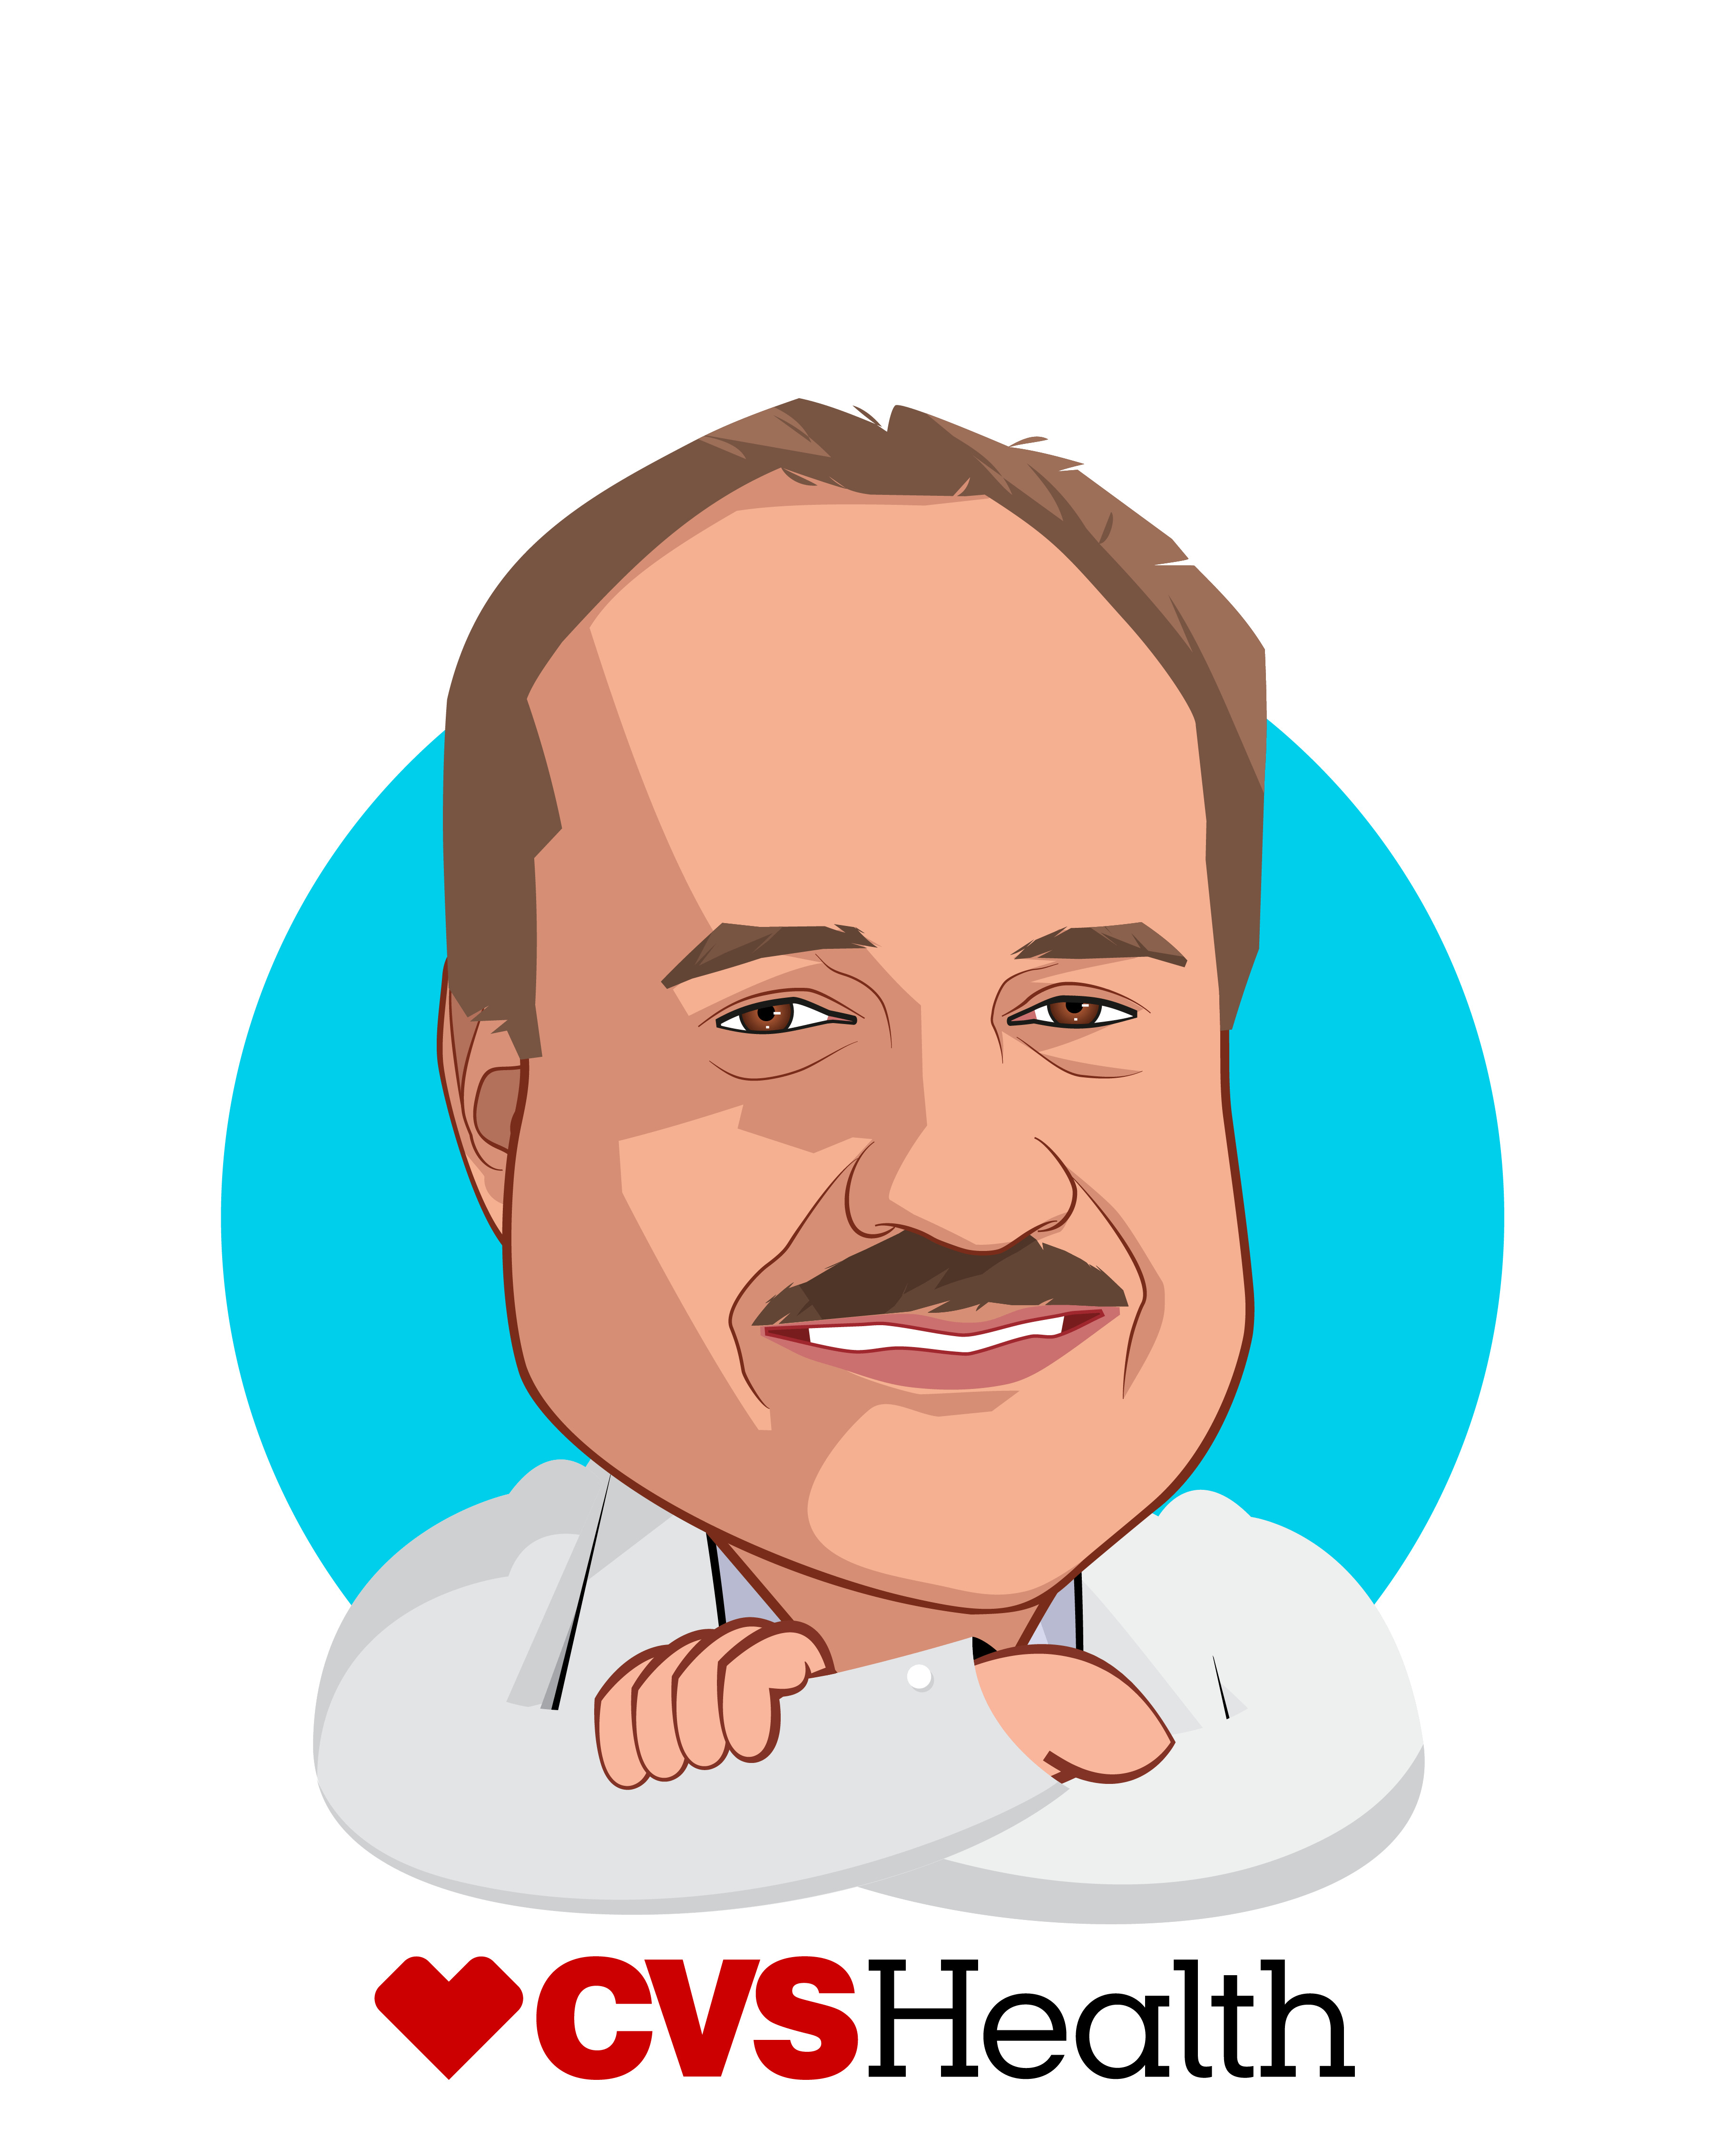 Caricature of Larry Merlo, who is speaking at HLTH